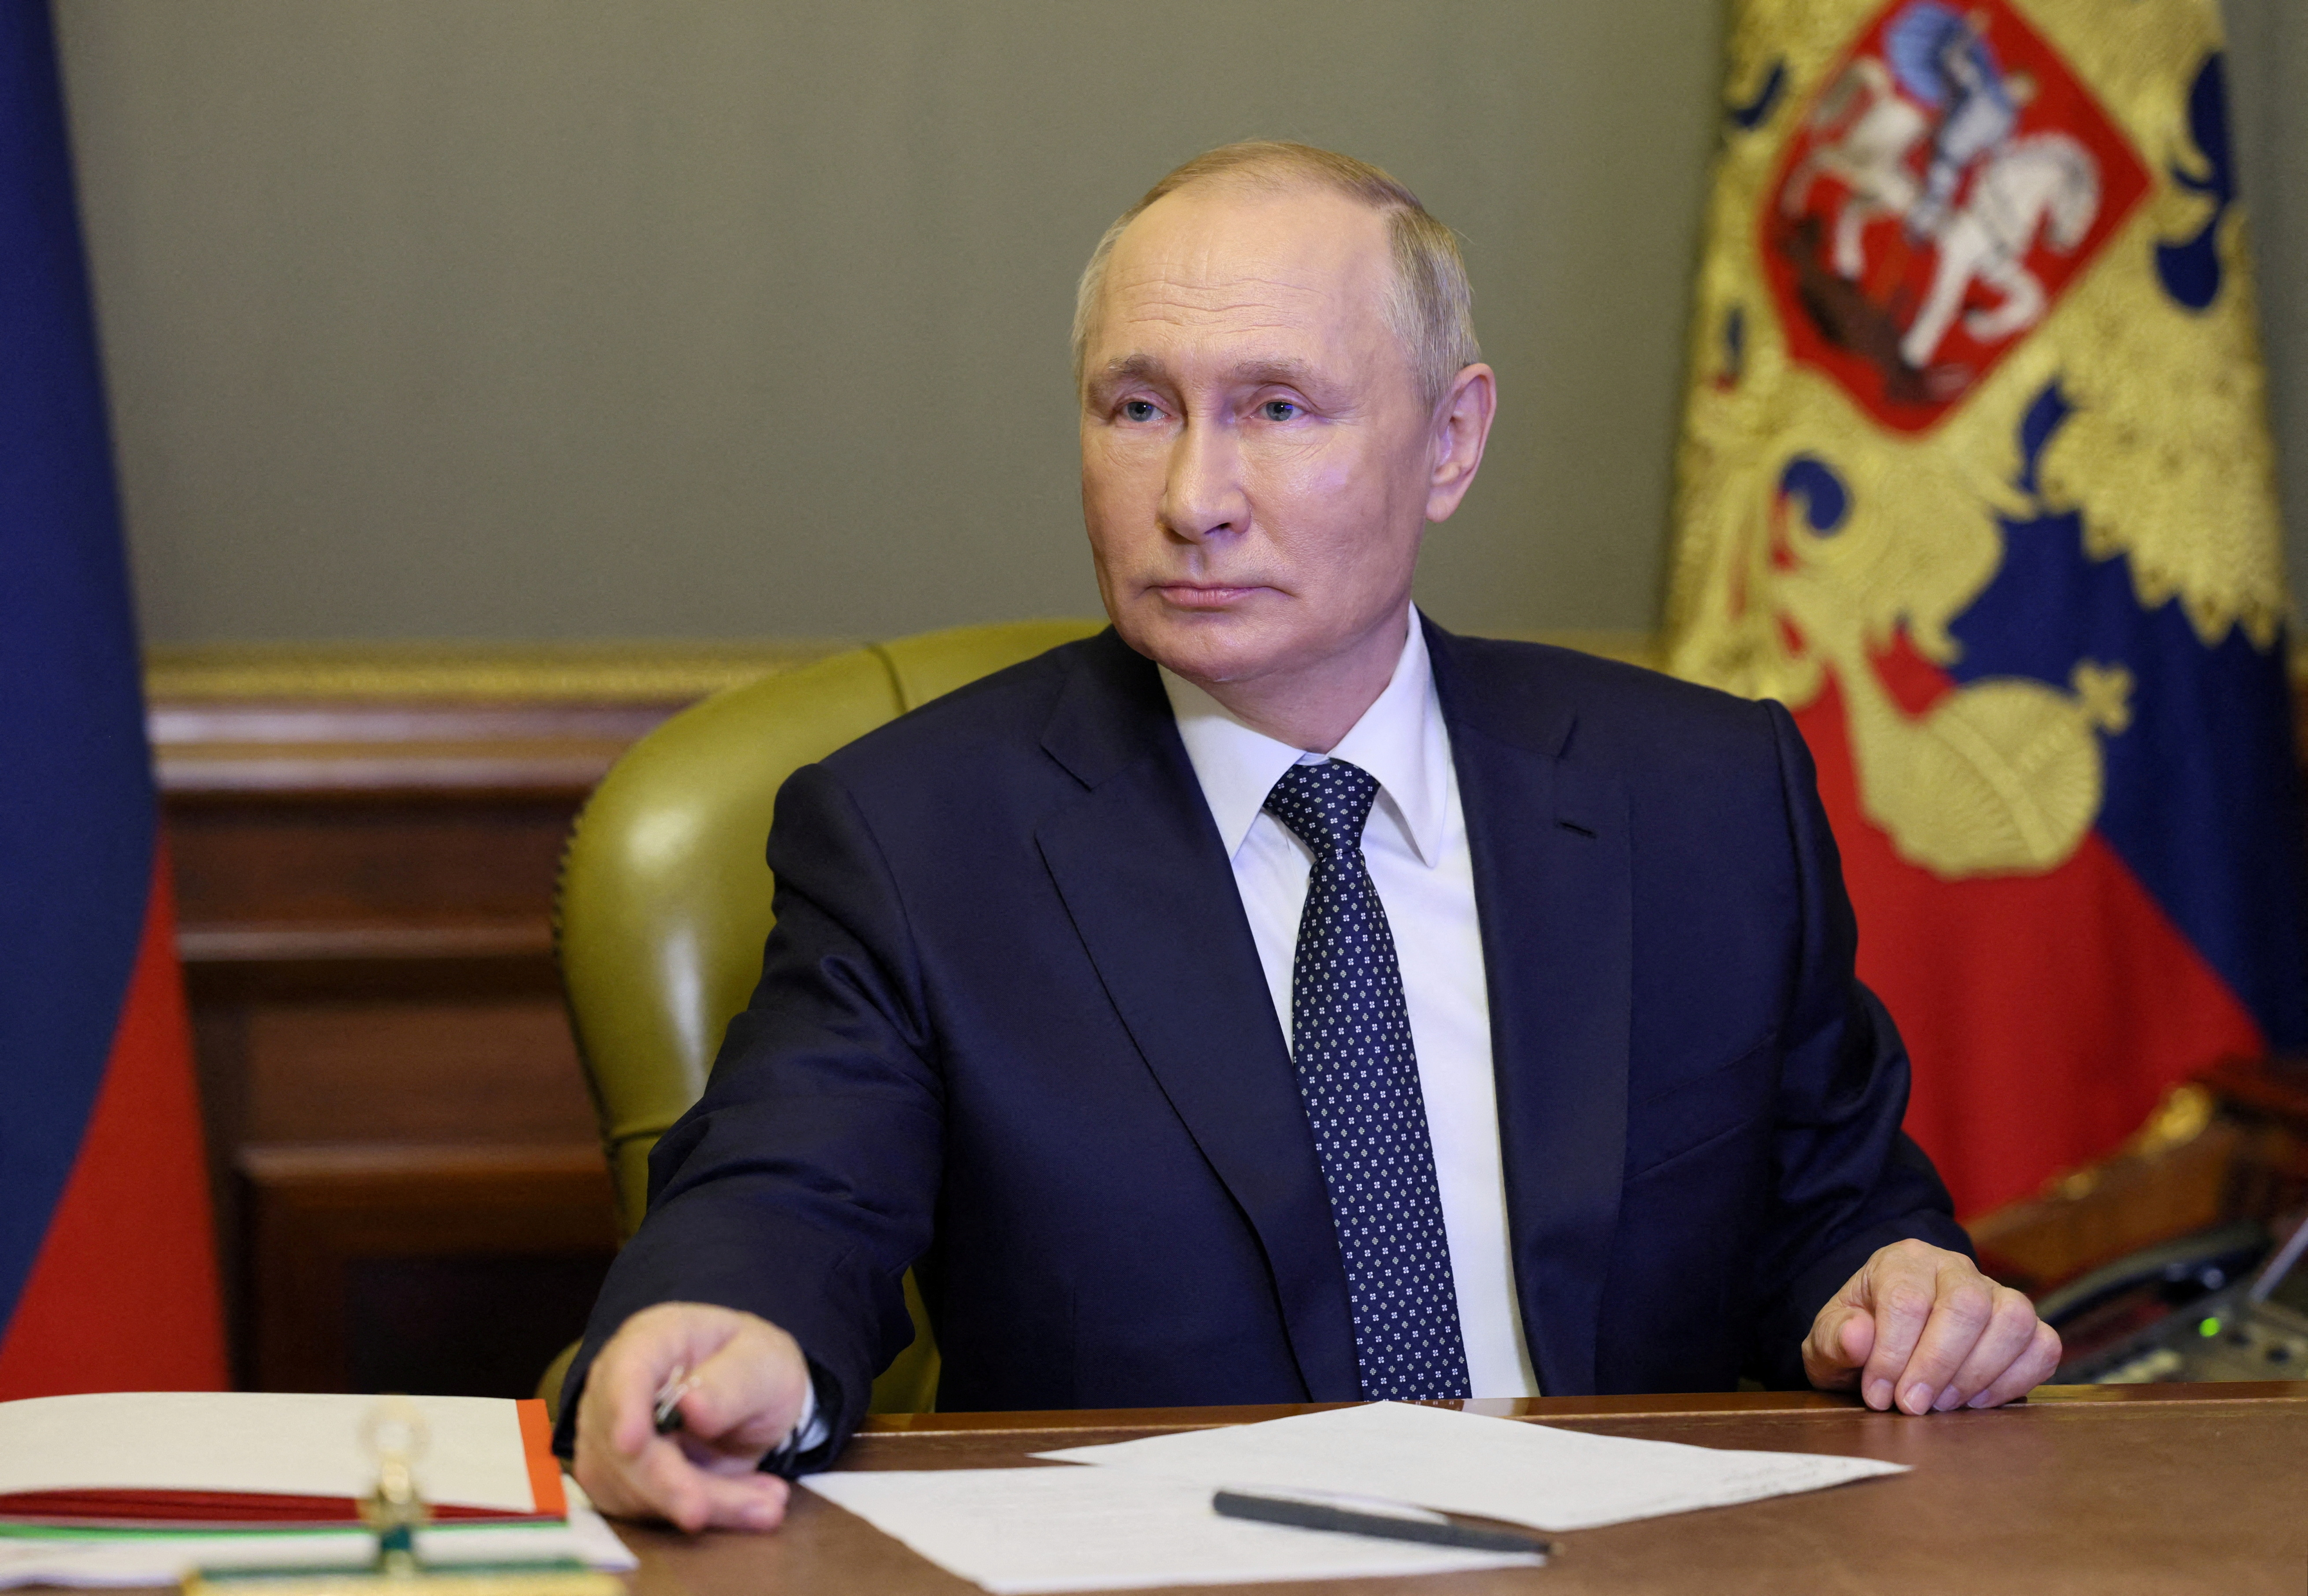 Russia's President Putin holds a video conference meeting in Saint Petersburg